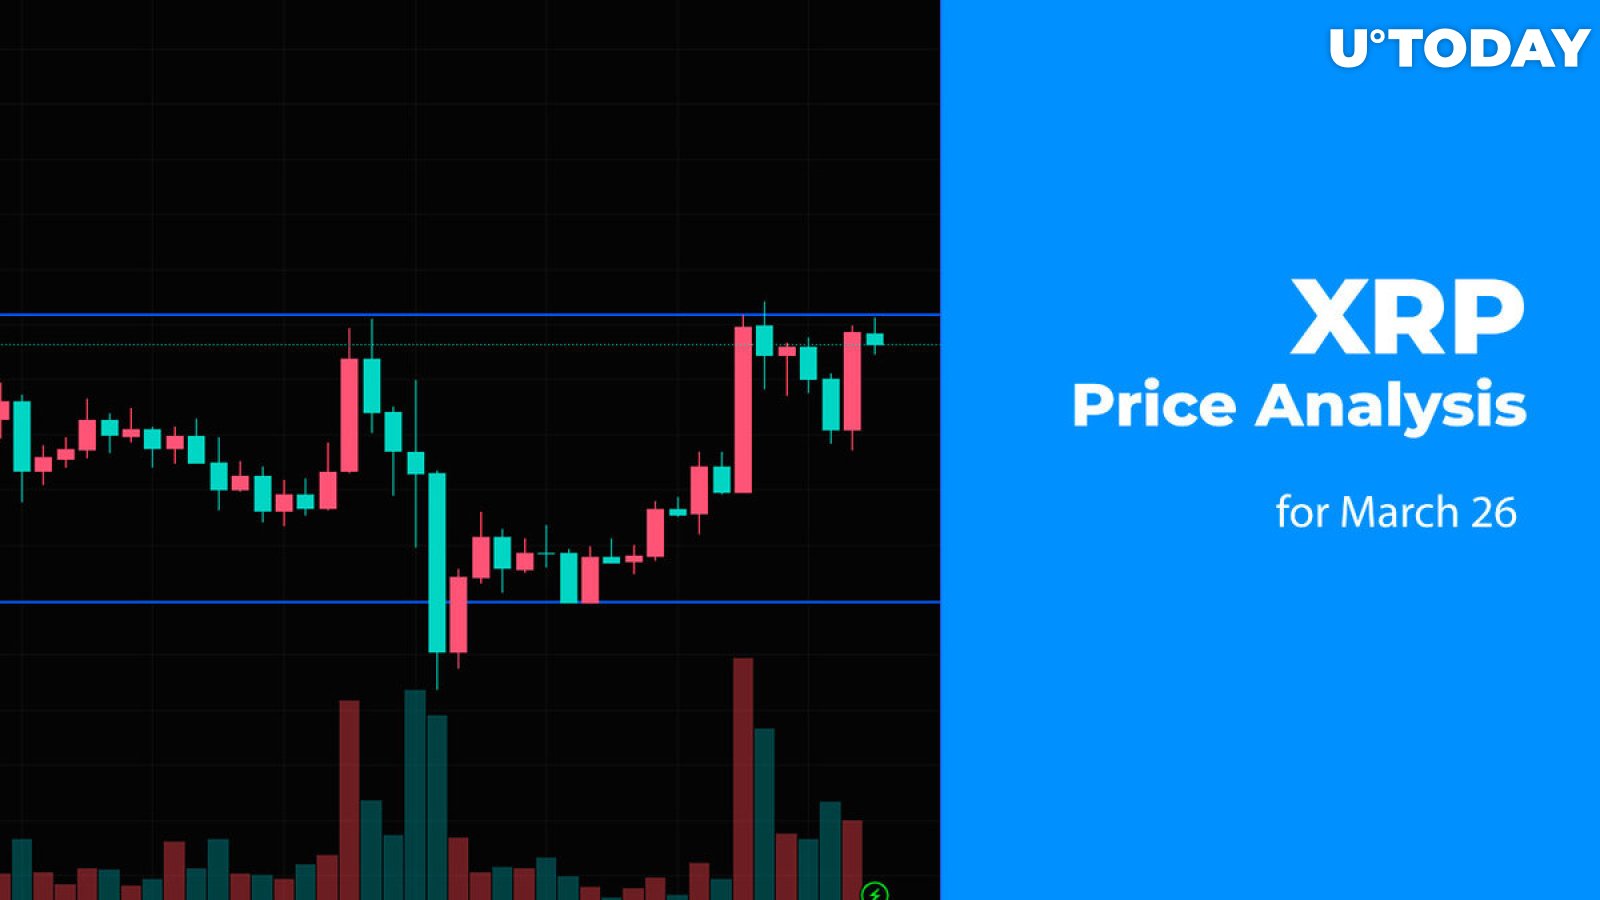 XRP Price Analysis for March 26